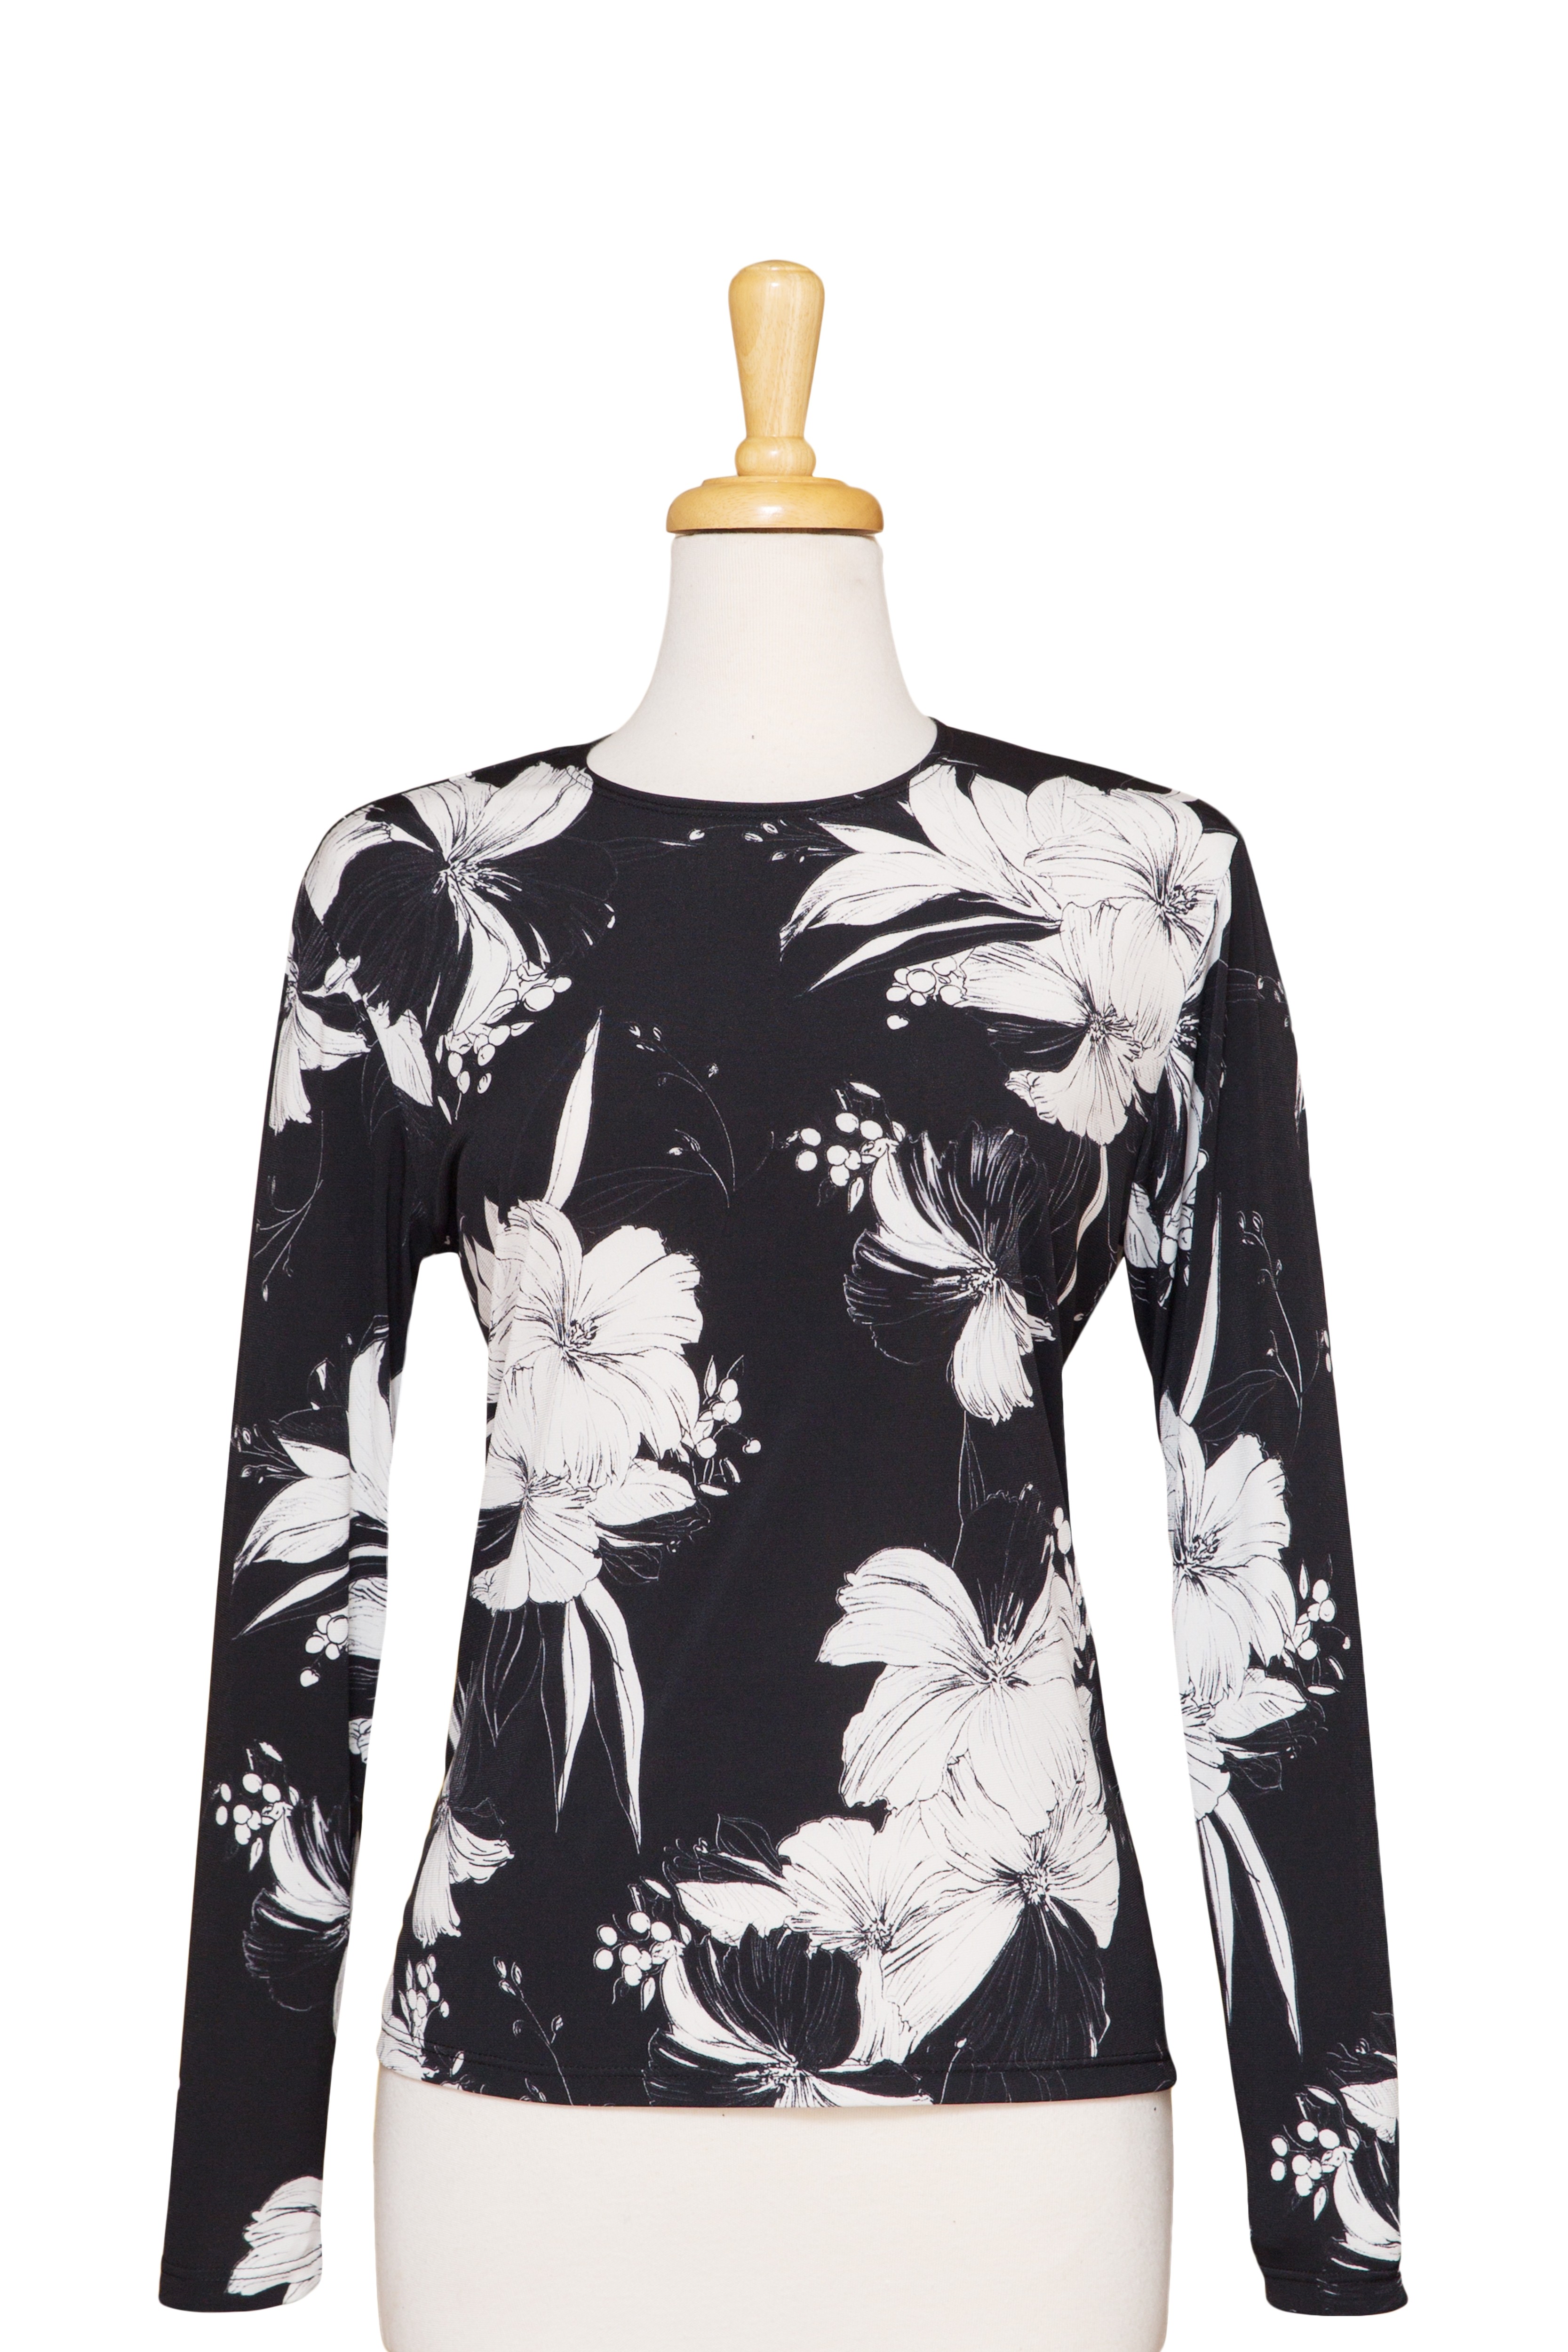 Black And White Floral Long Sleeve Microfiber Sleeve Top 